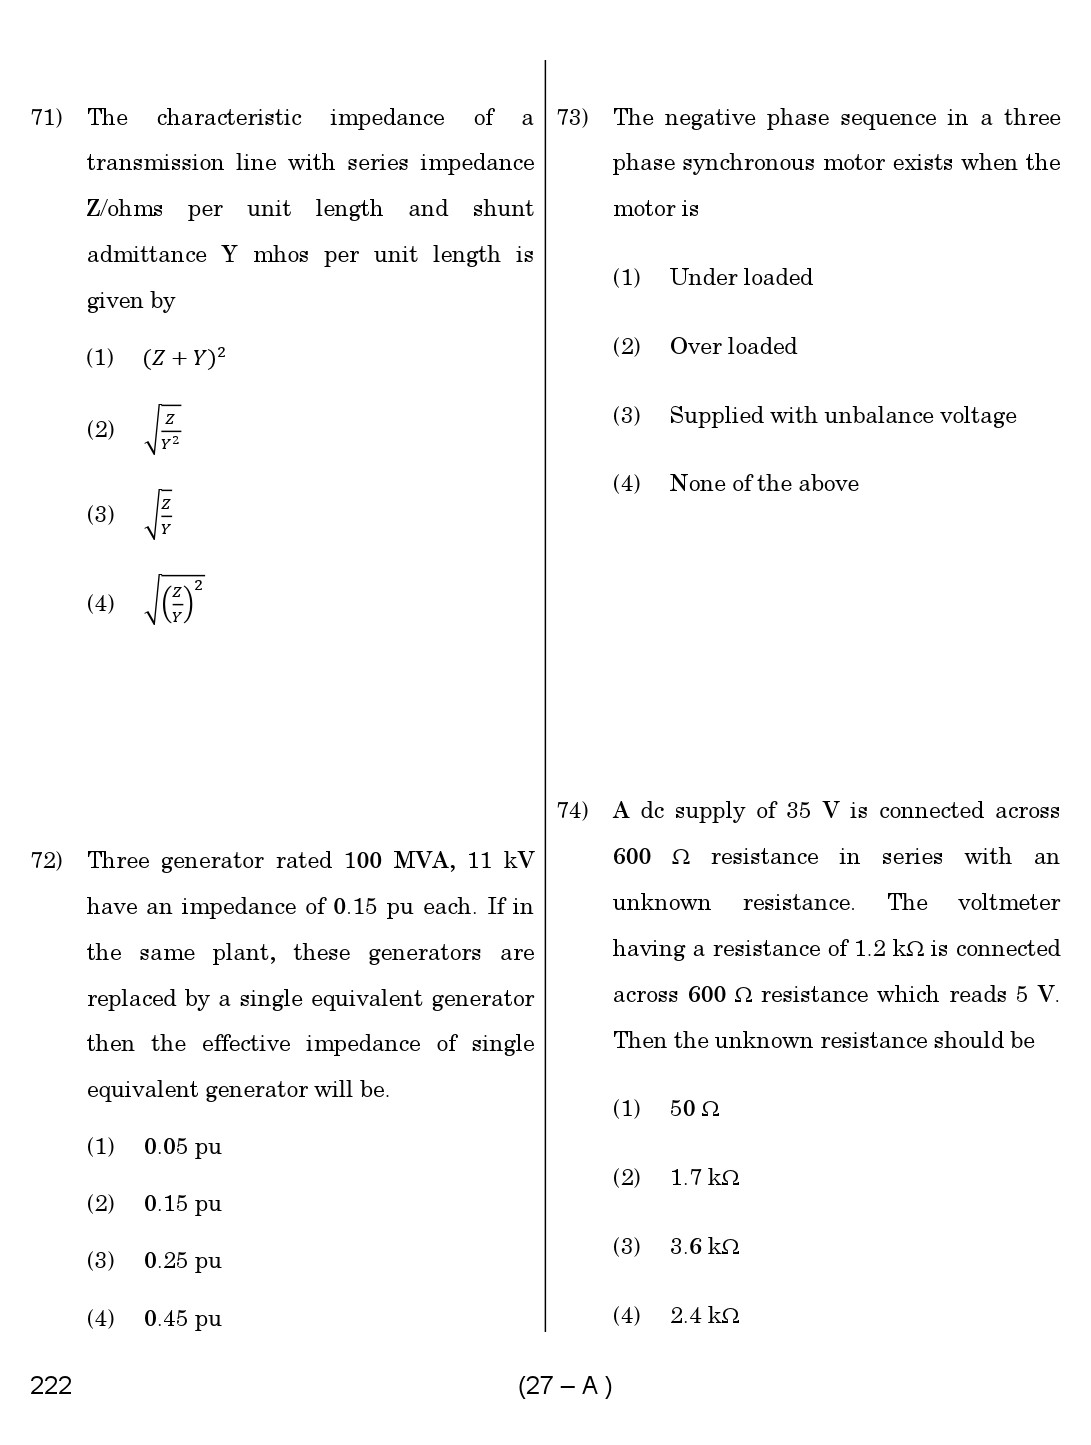 Karnataka PSC Assistant Engineer Electrical Exam Sample Question Paper 27